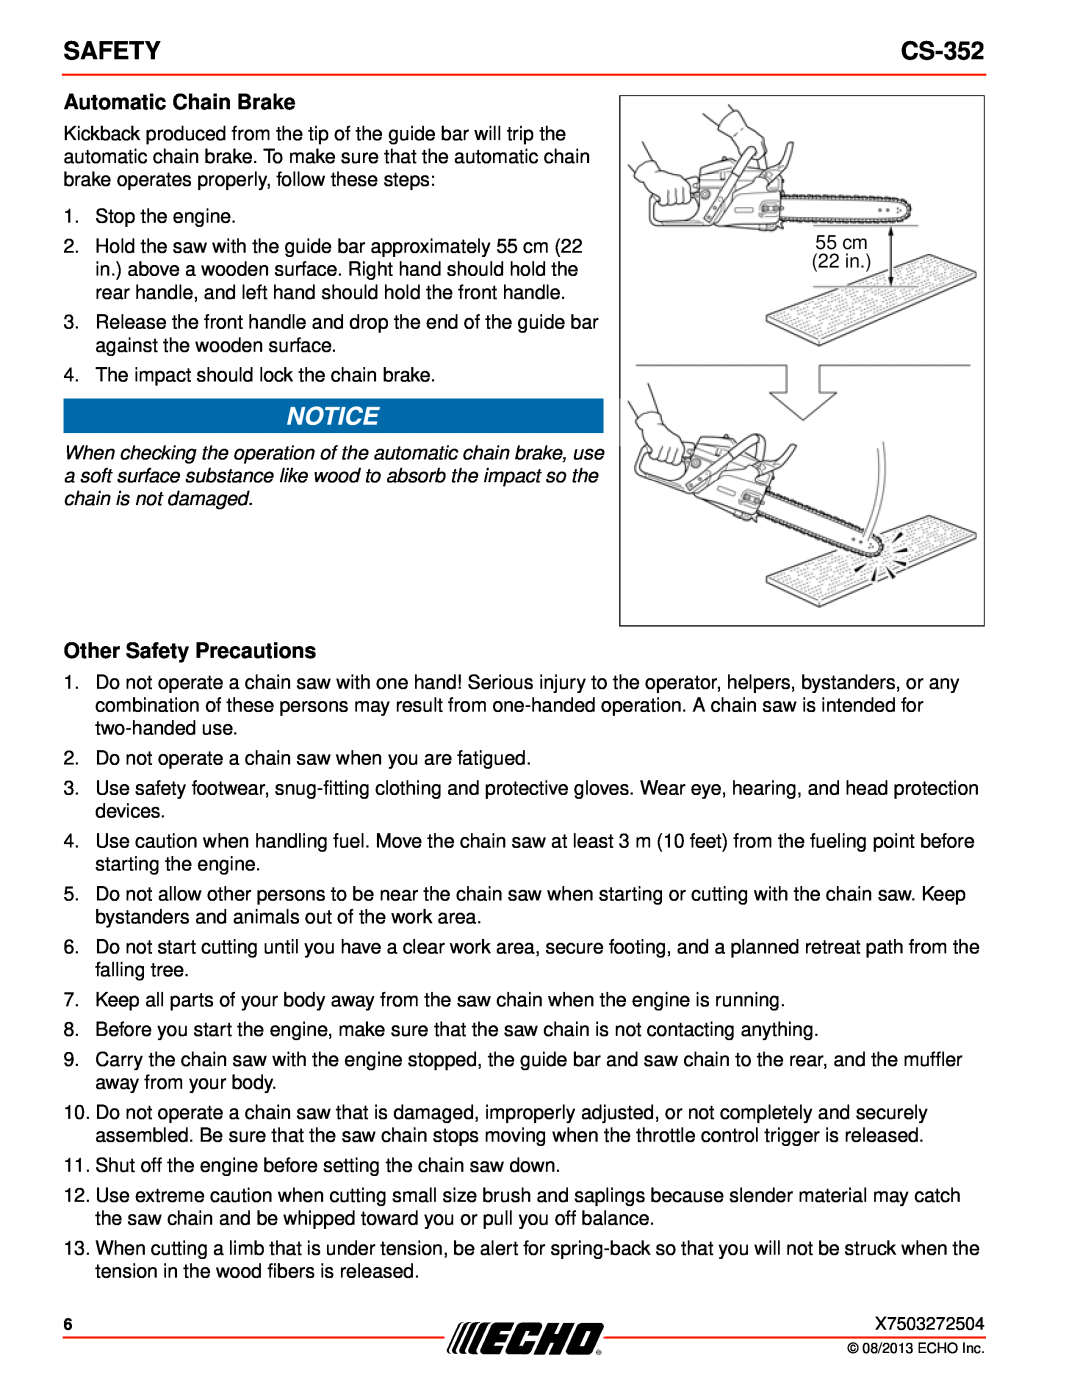 Echo CS-352 instruction manual Automatic Chain Brake, Other Safety Precautions 